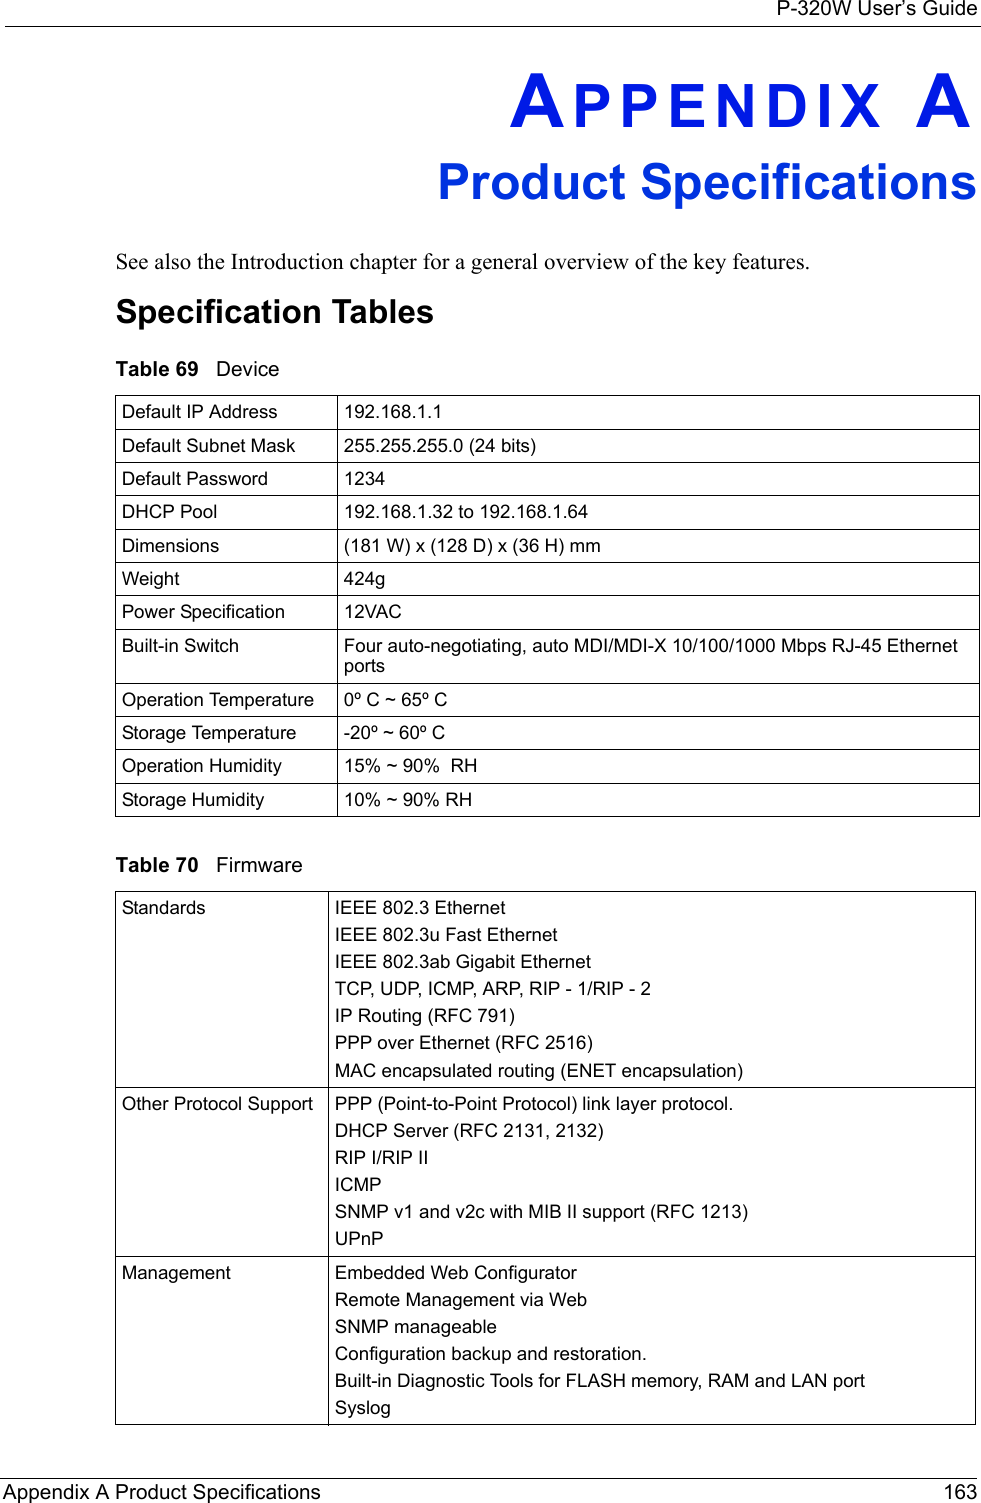 P-320W User’s GuideAppendix A Product Specifications 163APPENDIX AProduct SpecificationsSee also the Introduction chapter for a general overview of the key features.Specification TablesTable 69   DeviceDefault IP Address 192.168.1.1Default Subnet Mask 255.255.255.0 (24 bits)Default Password 1234DHCP Pool 192.168.1.32 to 192.168.1.64 Dimensions (181 W) x (128 D) x (36 H) mmWeight 424gPower Specification 12VAC Built-in Switch Four auto-negotiating, auto MDI/MDI-X 10/100/1000 Mbps RJ-45 Ethernet portsOperation Temperature 0º C ~ 65º CStorage Temperature -20º ~ 60º COperation Humidity 15% ~ 90%  RHStorage Humidity 10% ~ 90% RHTable 70   Firmware Standards IEEE 802.3 EthernetIEEE 802.3u Fast EthernetIEEE 802.3ab Gigabit EthernetTCP, UDP, ICMP, ARP, RIP - 1/RIP - 2IP Routing (RFC 791)PPP over Ethernet (RFC 2516)MAC encapsulated routing (ENET encapsulation)Other Protocol Support PPP (Point-to-Point Protocol) link layer protocol.DHCP Server (RFC 2131, 2132)RIP I/RIP IIICMPSNMP v1 and v2c with MIB II support (RFC 1213)UPnPManagement Embedded Web ConfiguratorRemote Management via WebSNMP manageableConfiguration backup and restoration. Built-in Diagnostic Tools for FLASH memory, RAM and LAN portSyslog